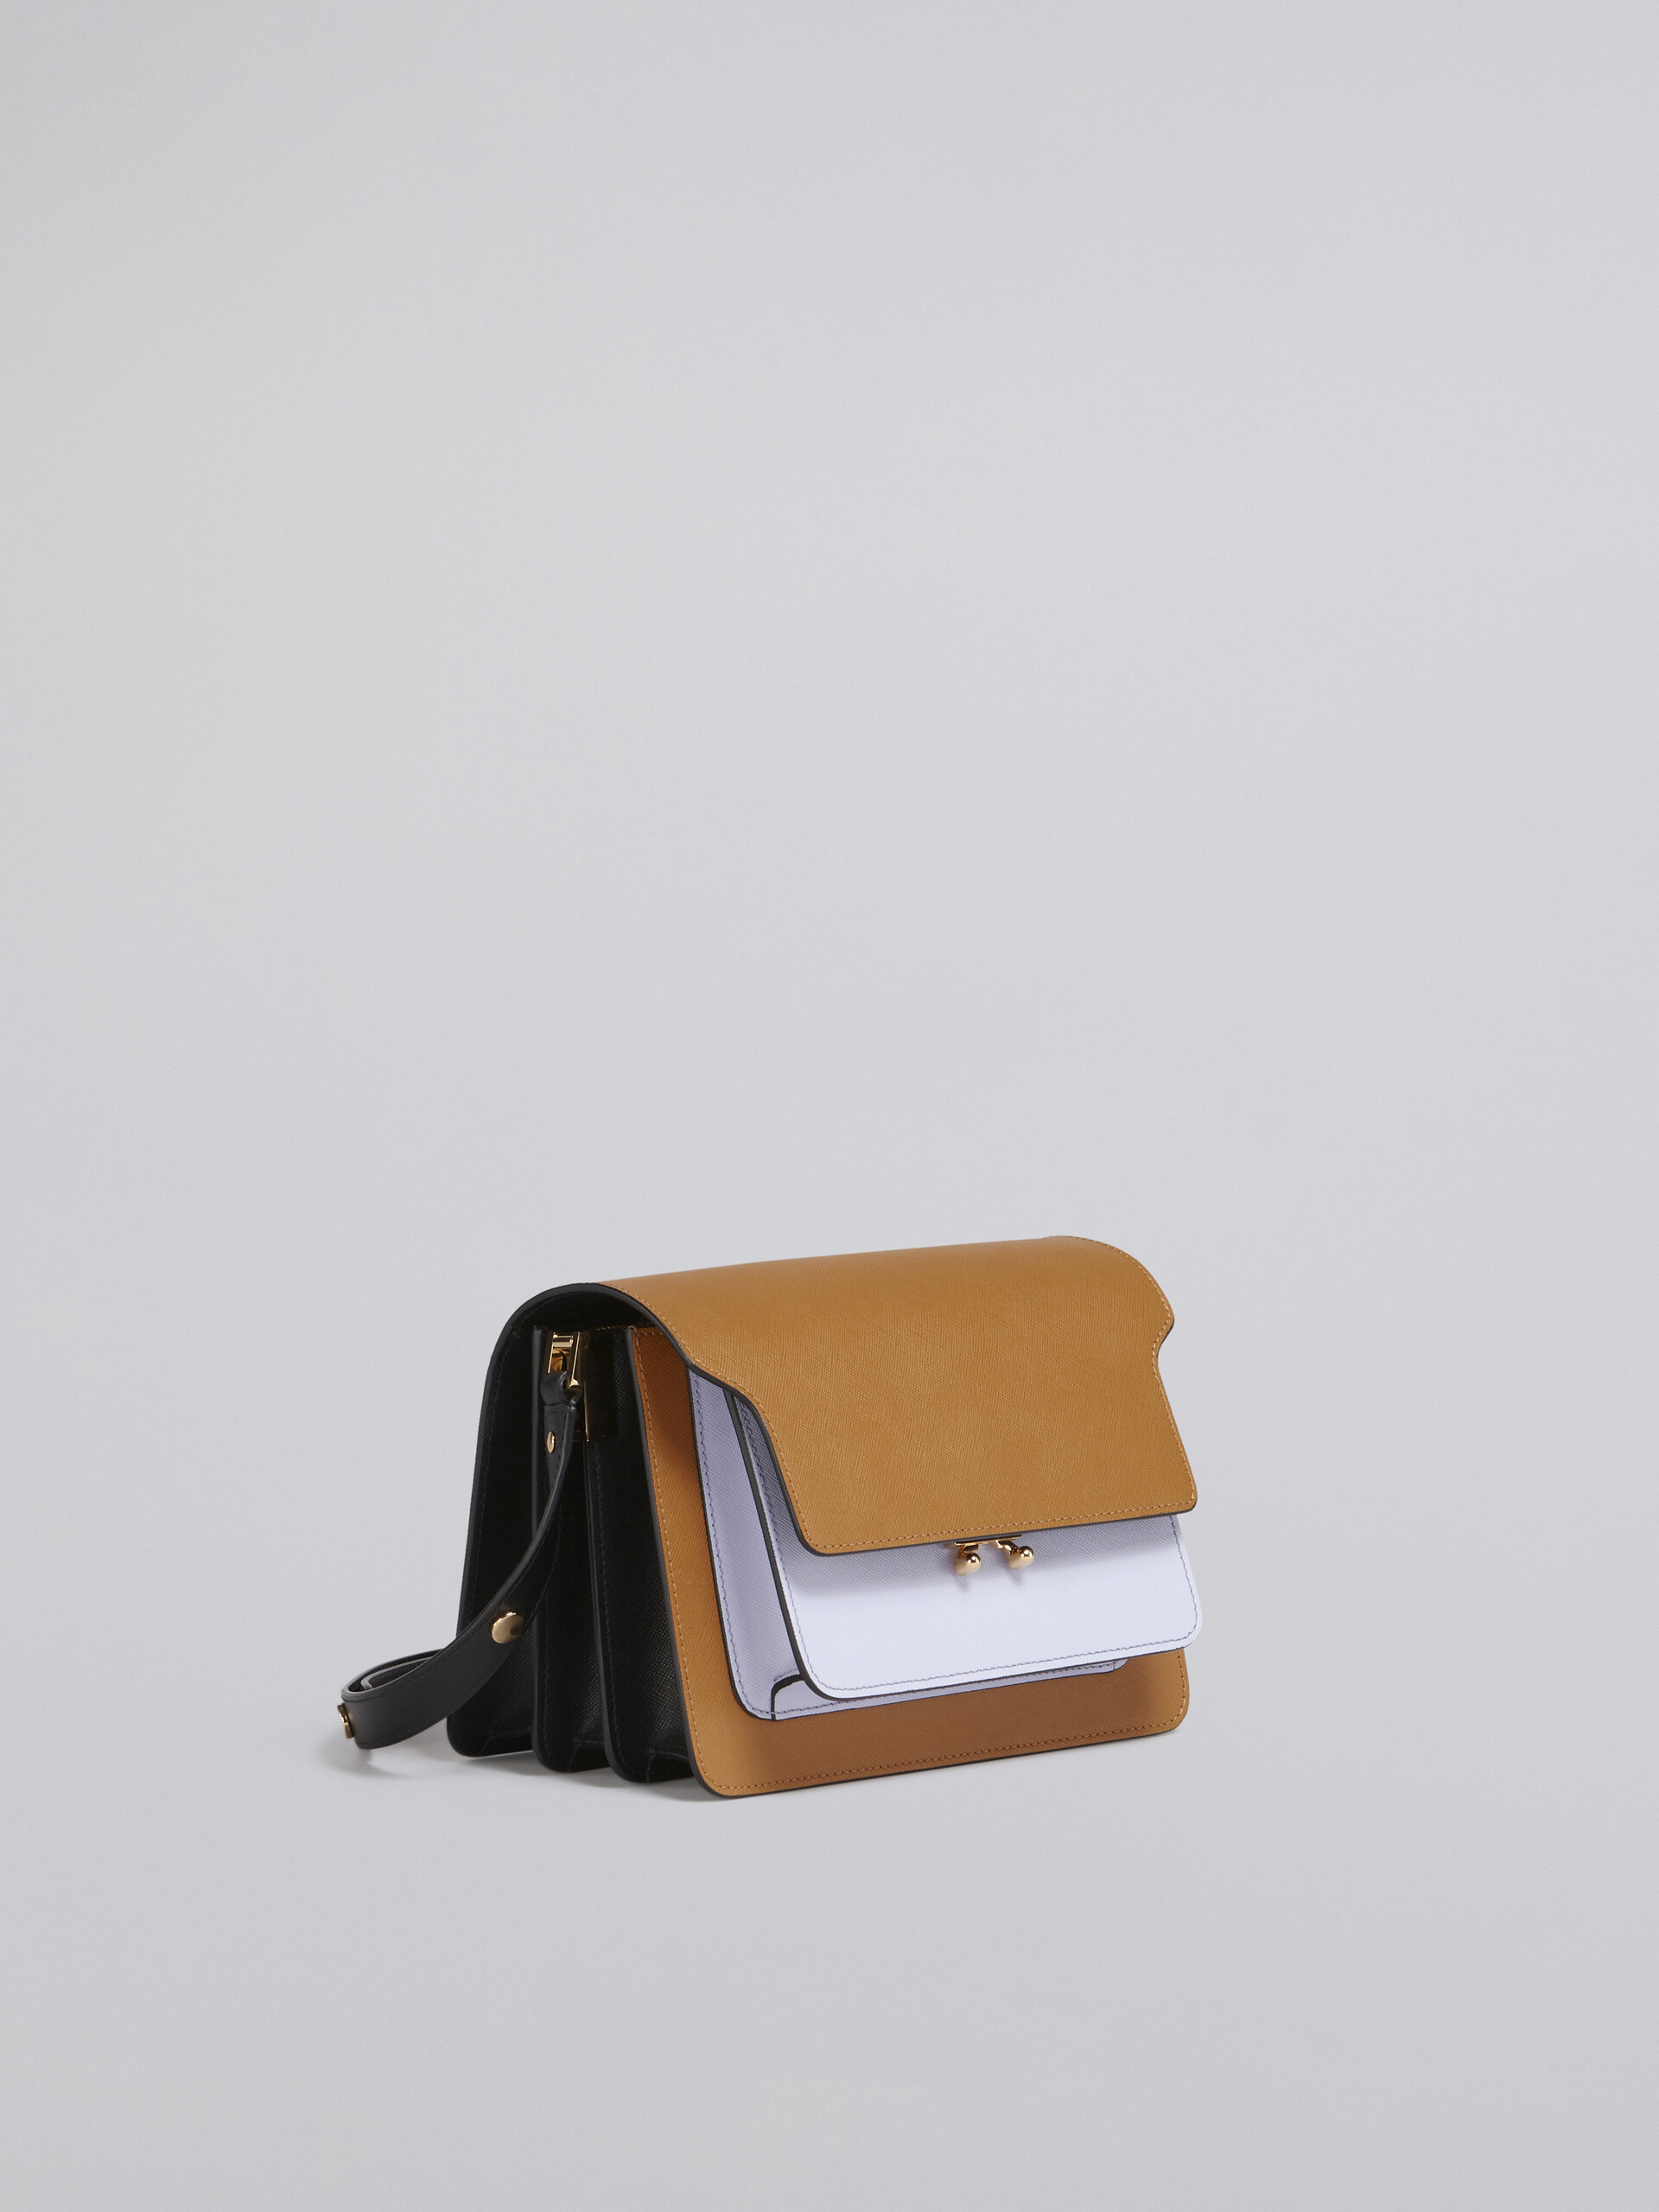 TRUNK medium bag in brown lilac and black saffiano leather - Shoulder Bags - Image 6